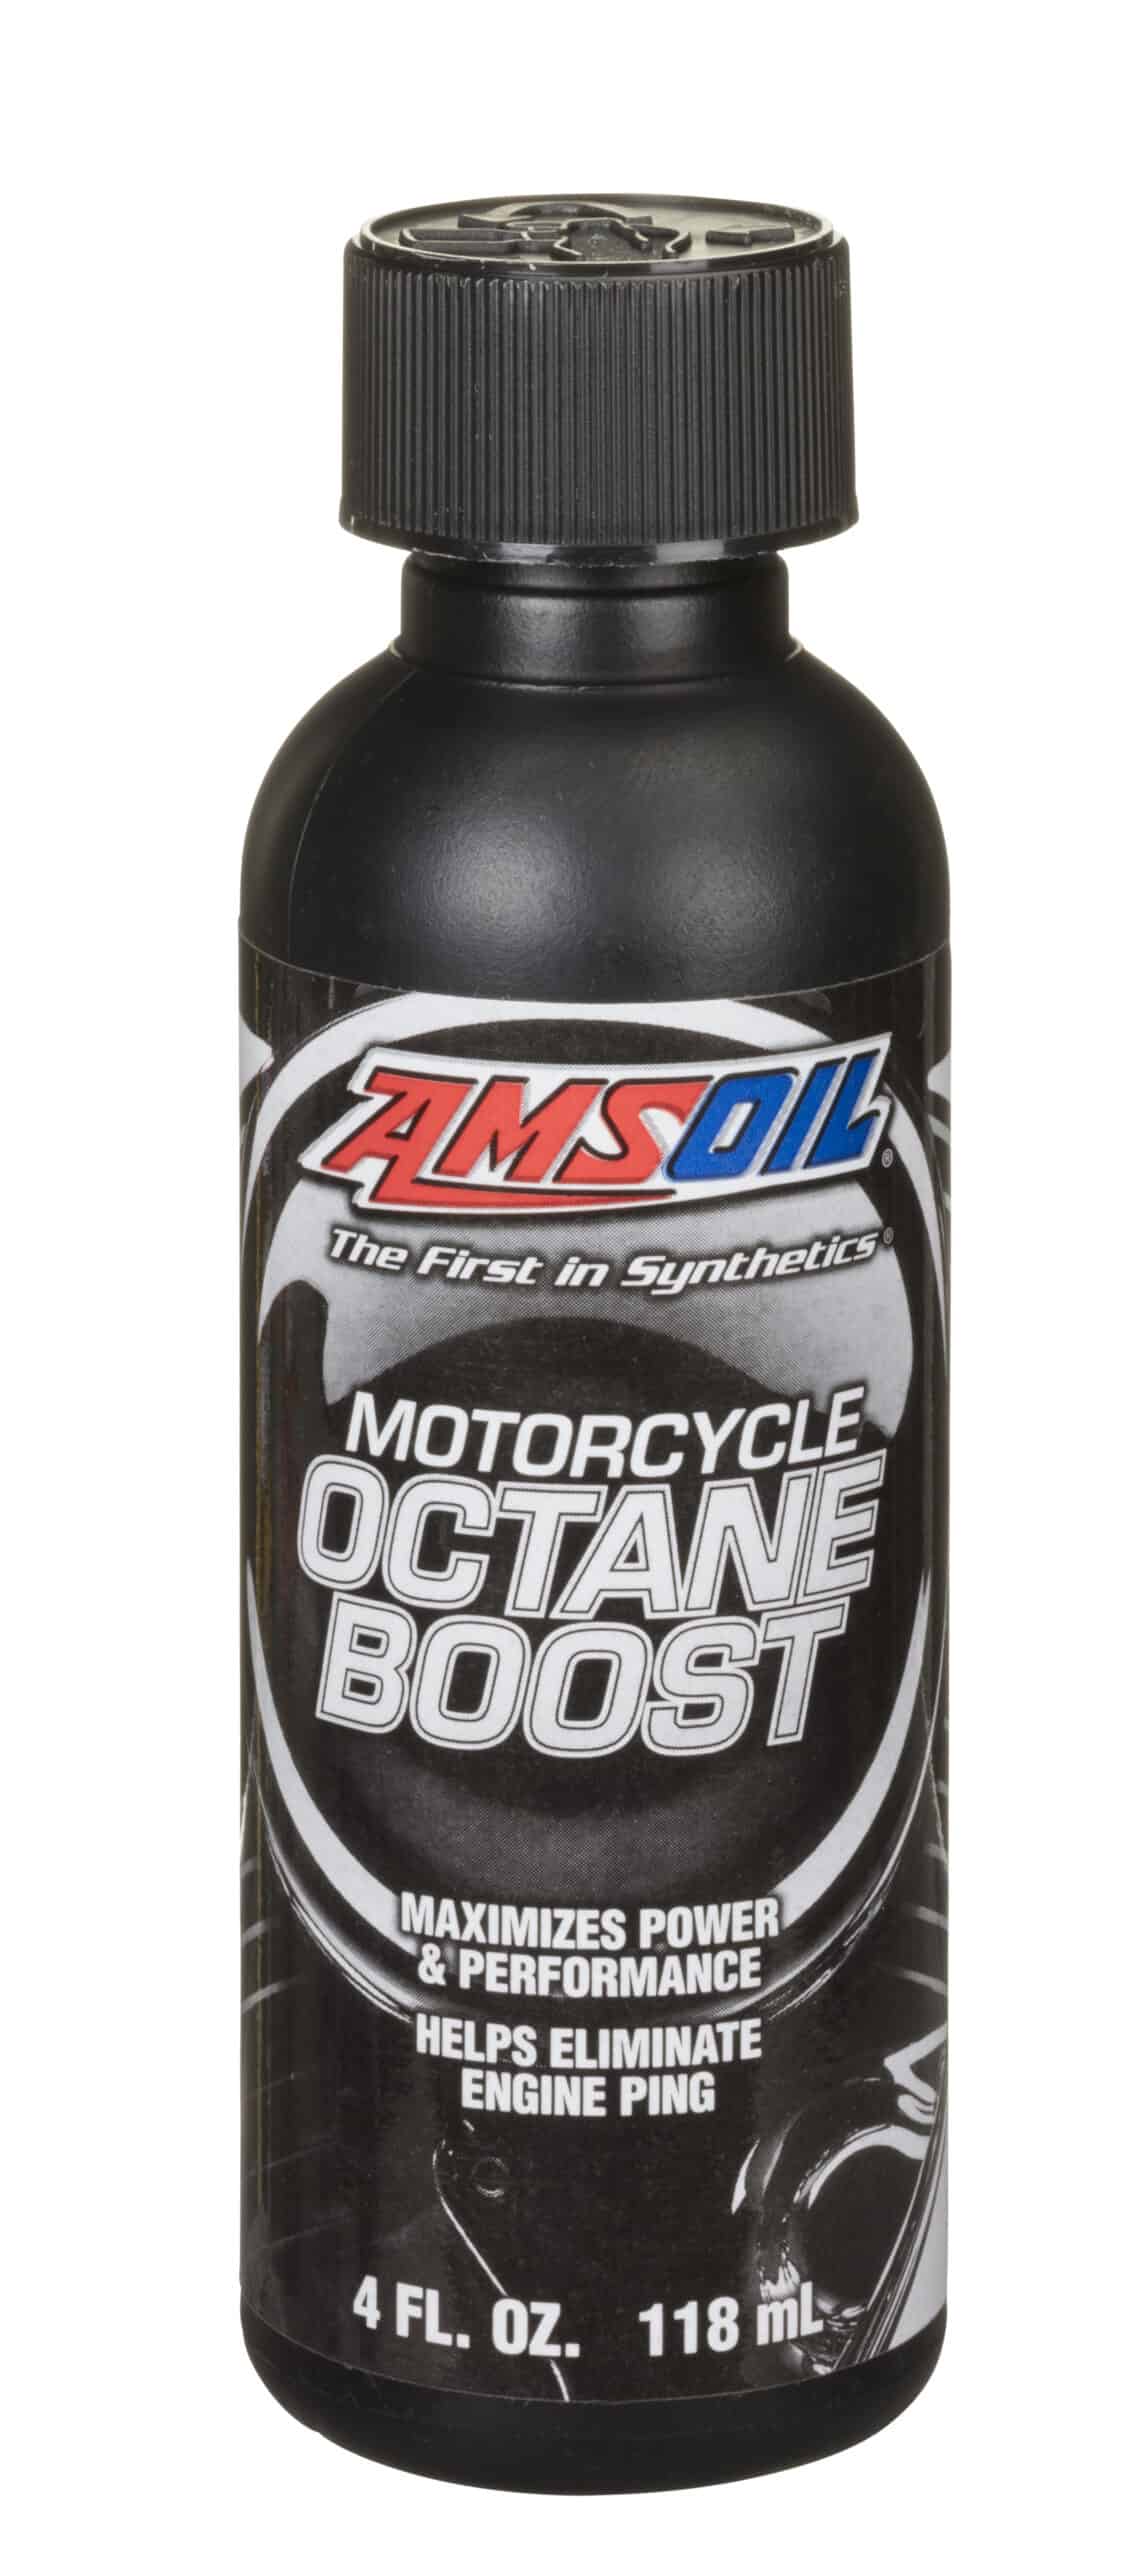 A bottle of AMSOIL Motorcycle Octane Boost, designed to improve startup performance & eliminate engine ping or knock for increased power at low-rpm operation.